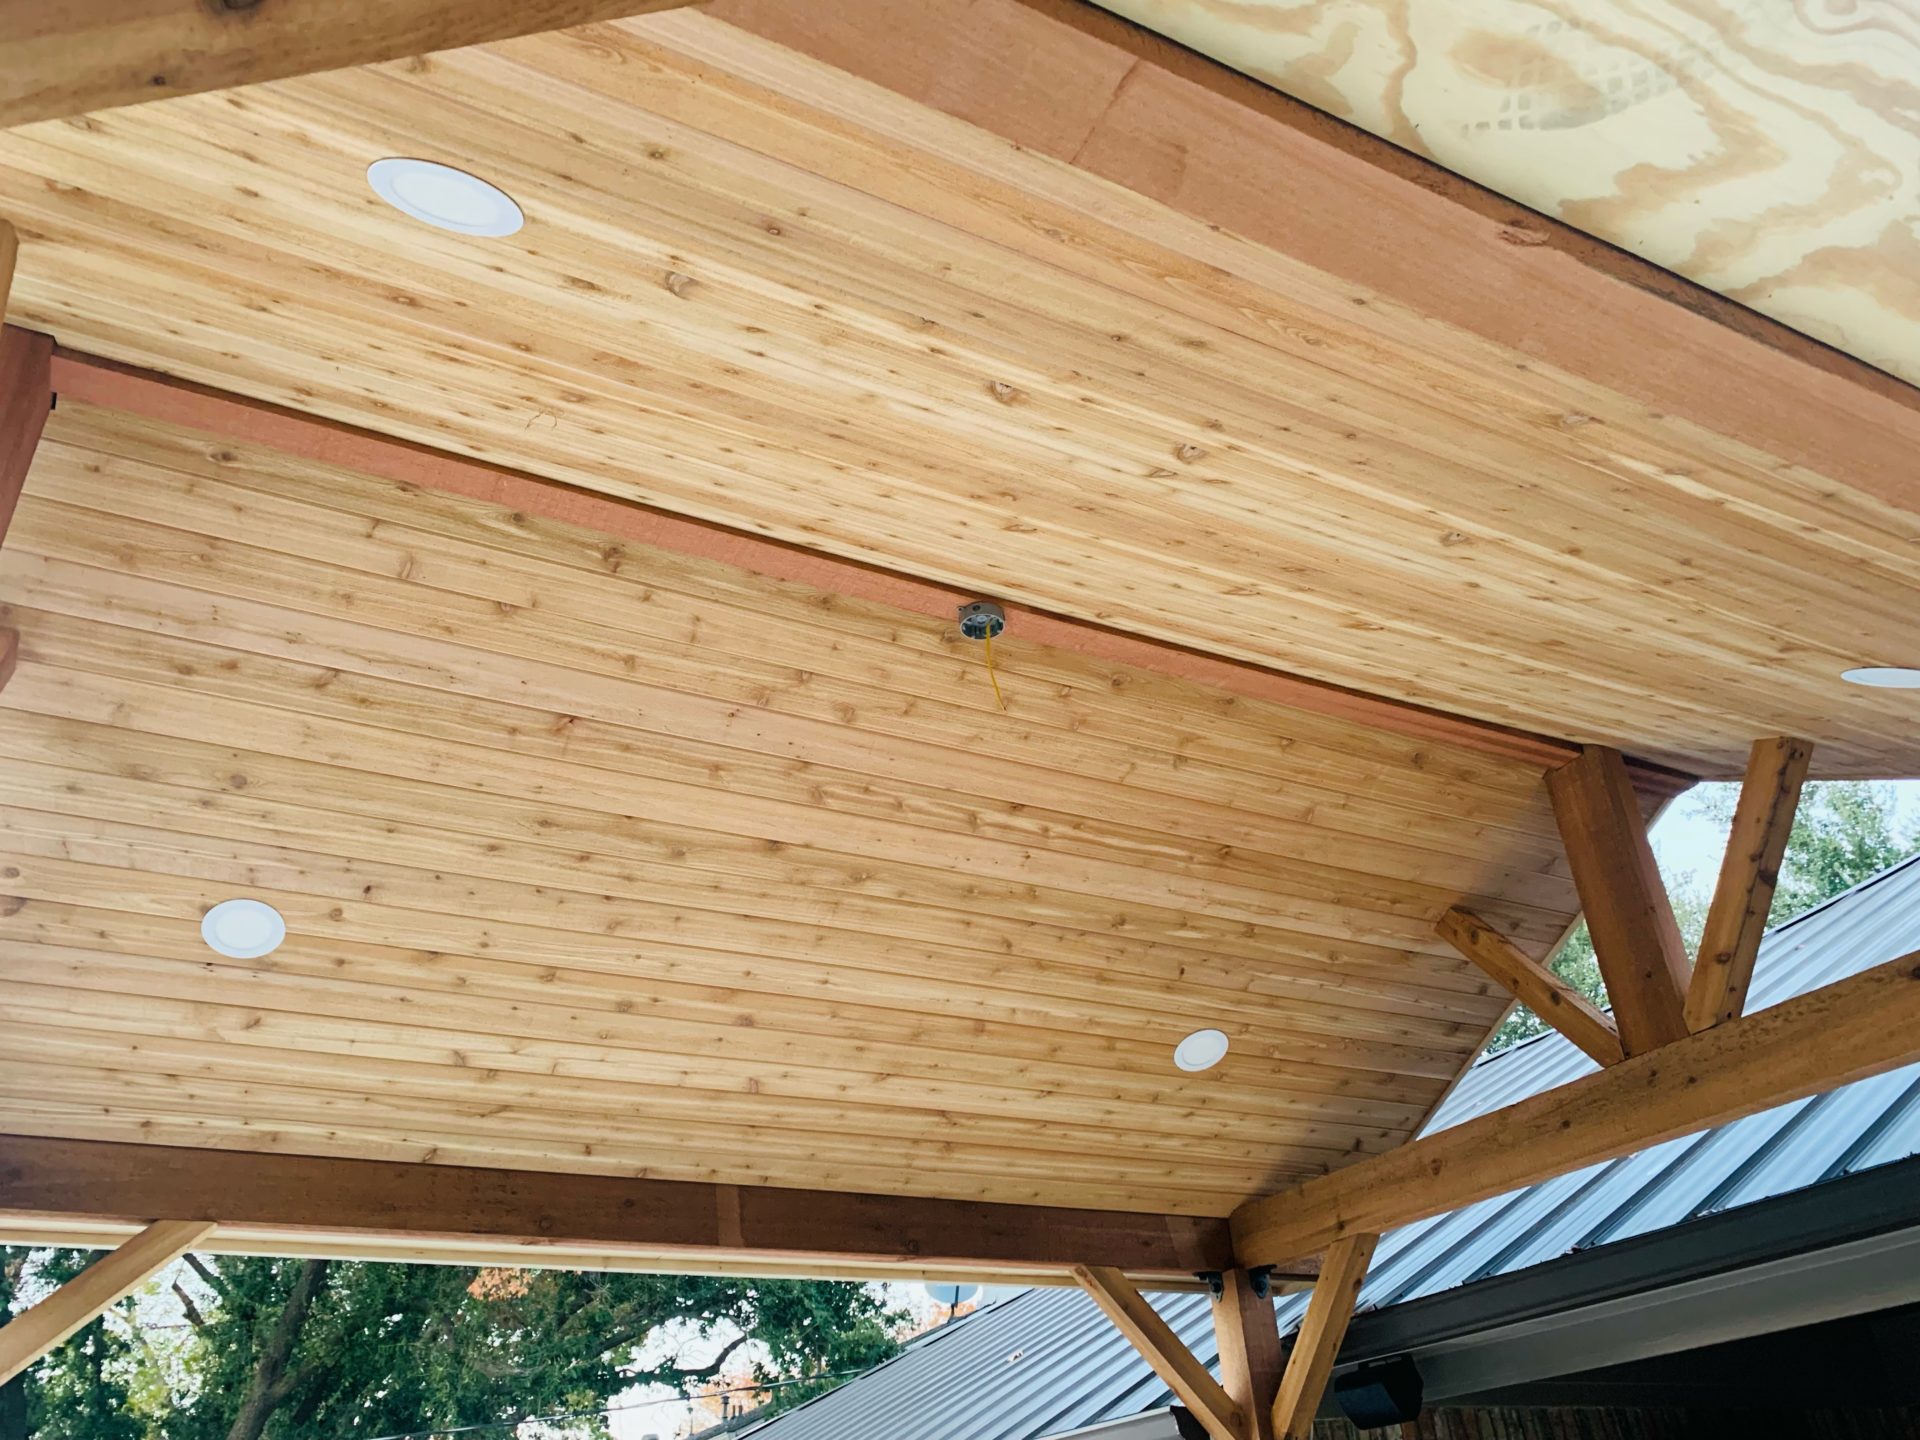 Underside of outdoor pavilion patio cover build in Arlington, TX by Jenkins Roofing and Construction